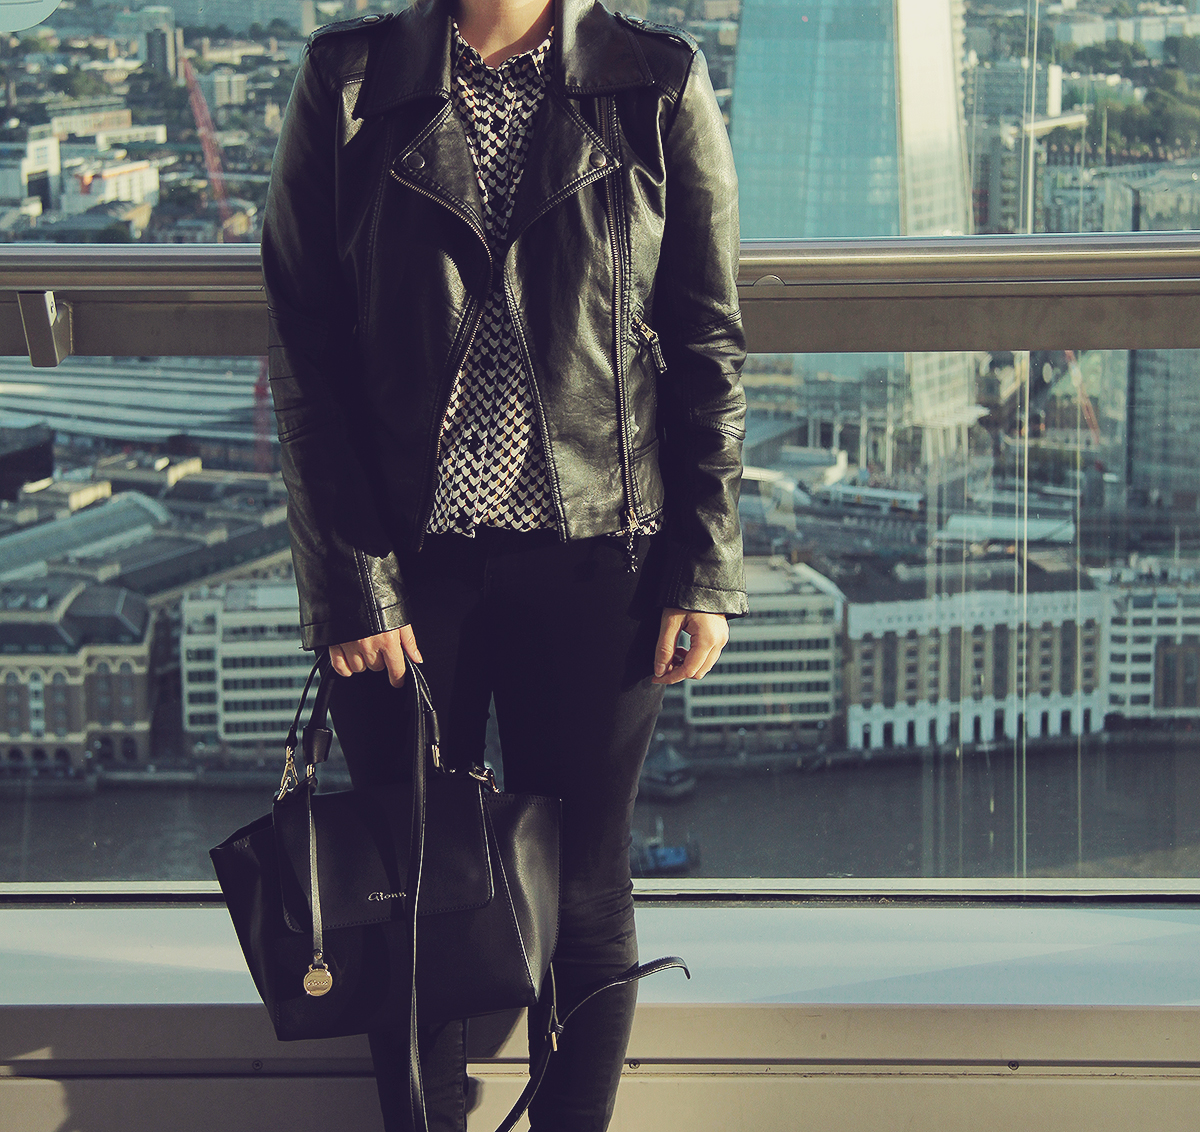 london-faux-leather-jacket-and-bag